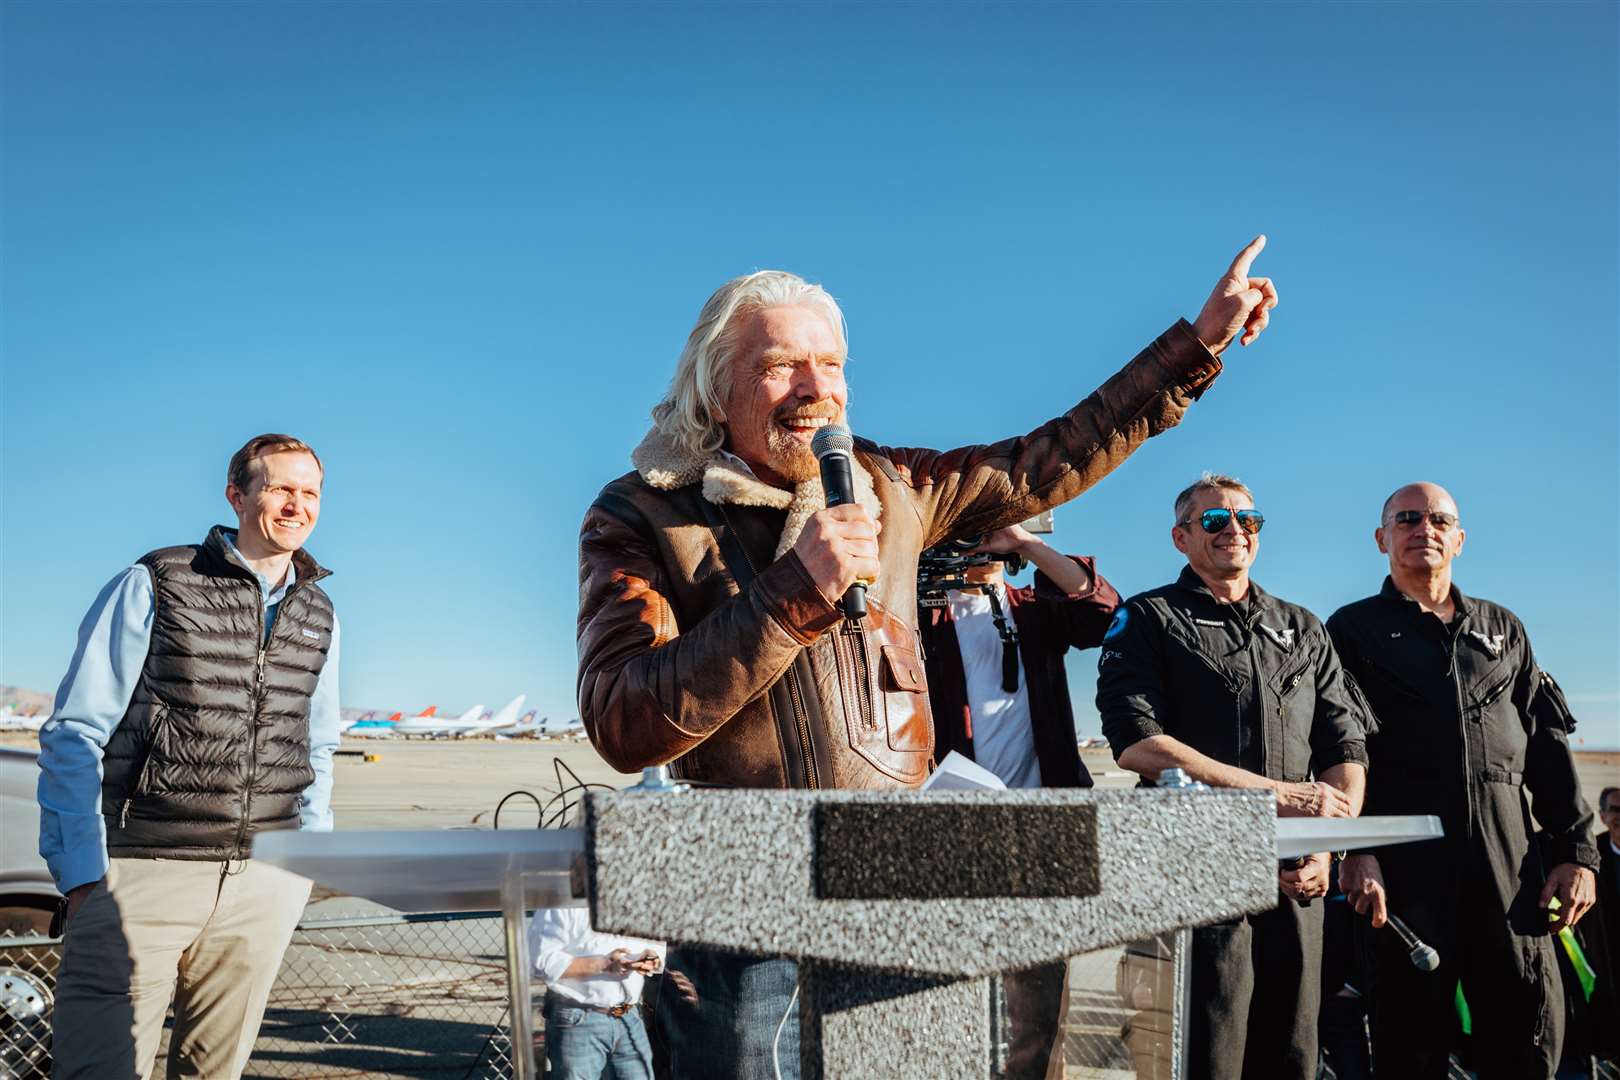 Sir Richard Branson is keen to fly tourists into space with Virgin Galactic (Virgin Galactic/PA)